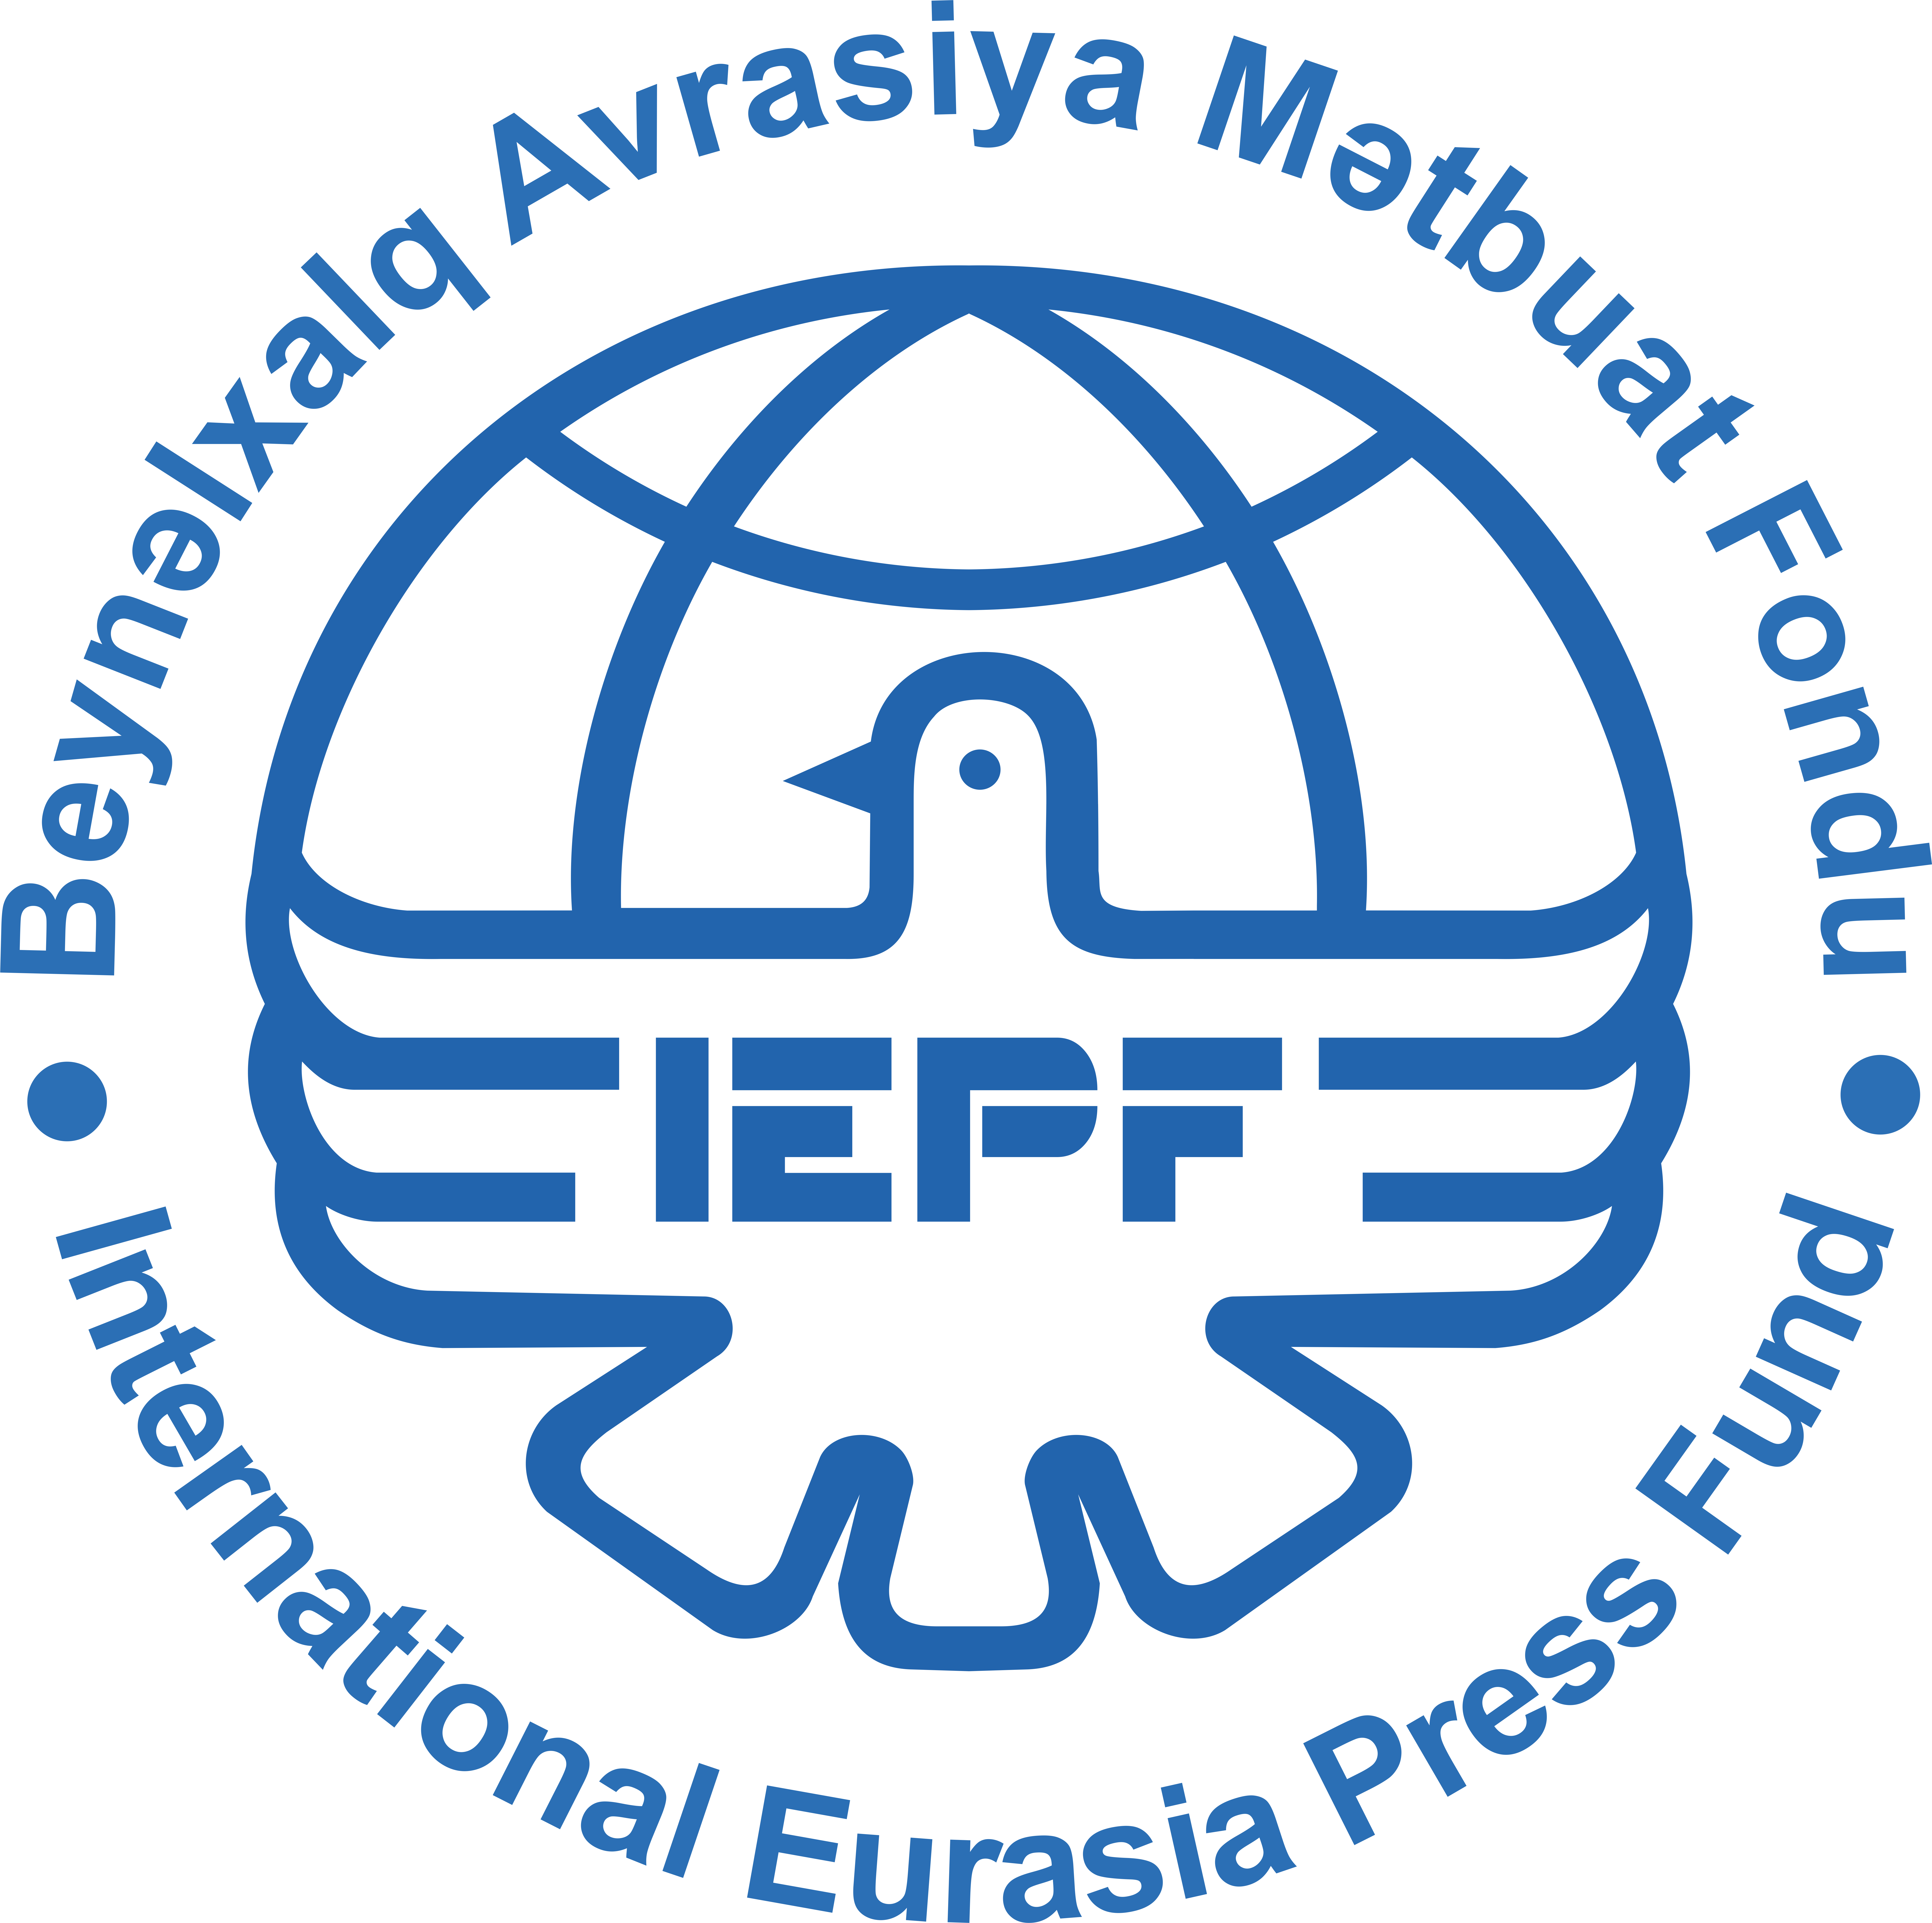 The International Eurasia Press Fund ISSUED A STATEMENT about the Armenian provocation